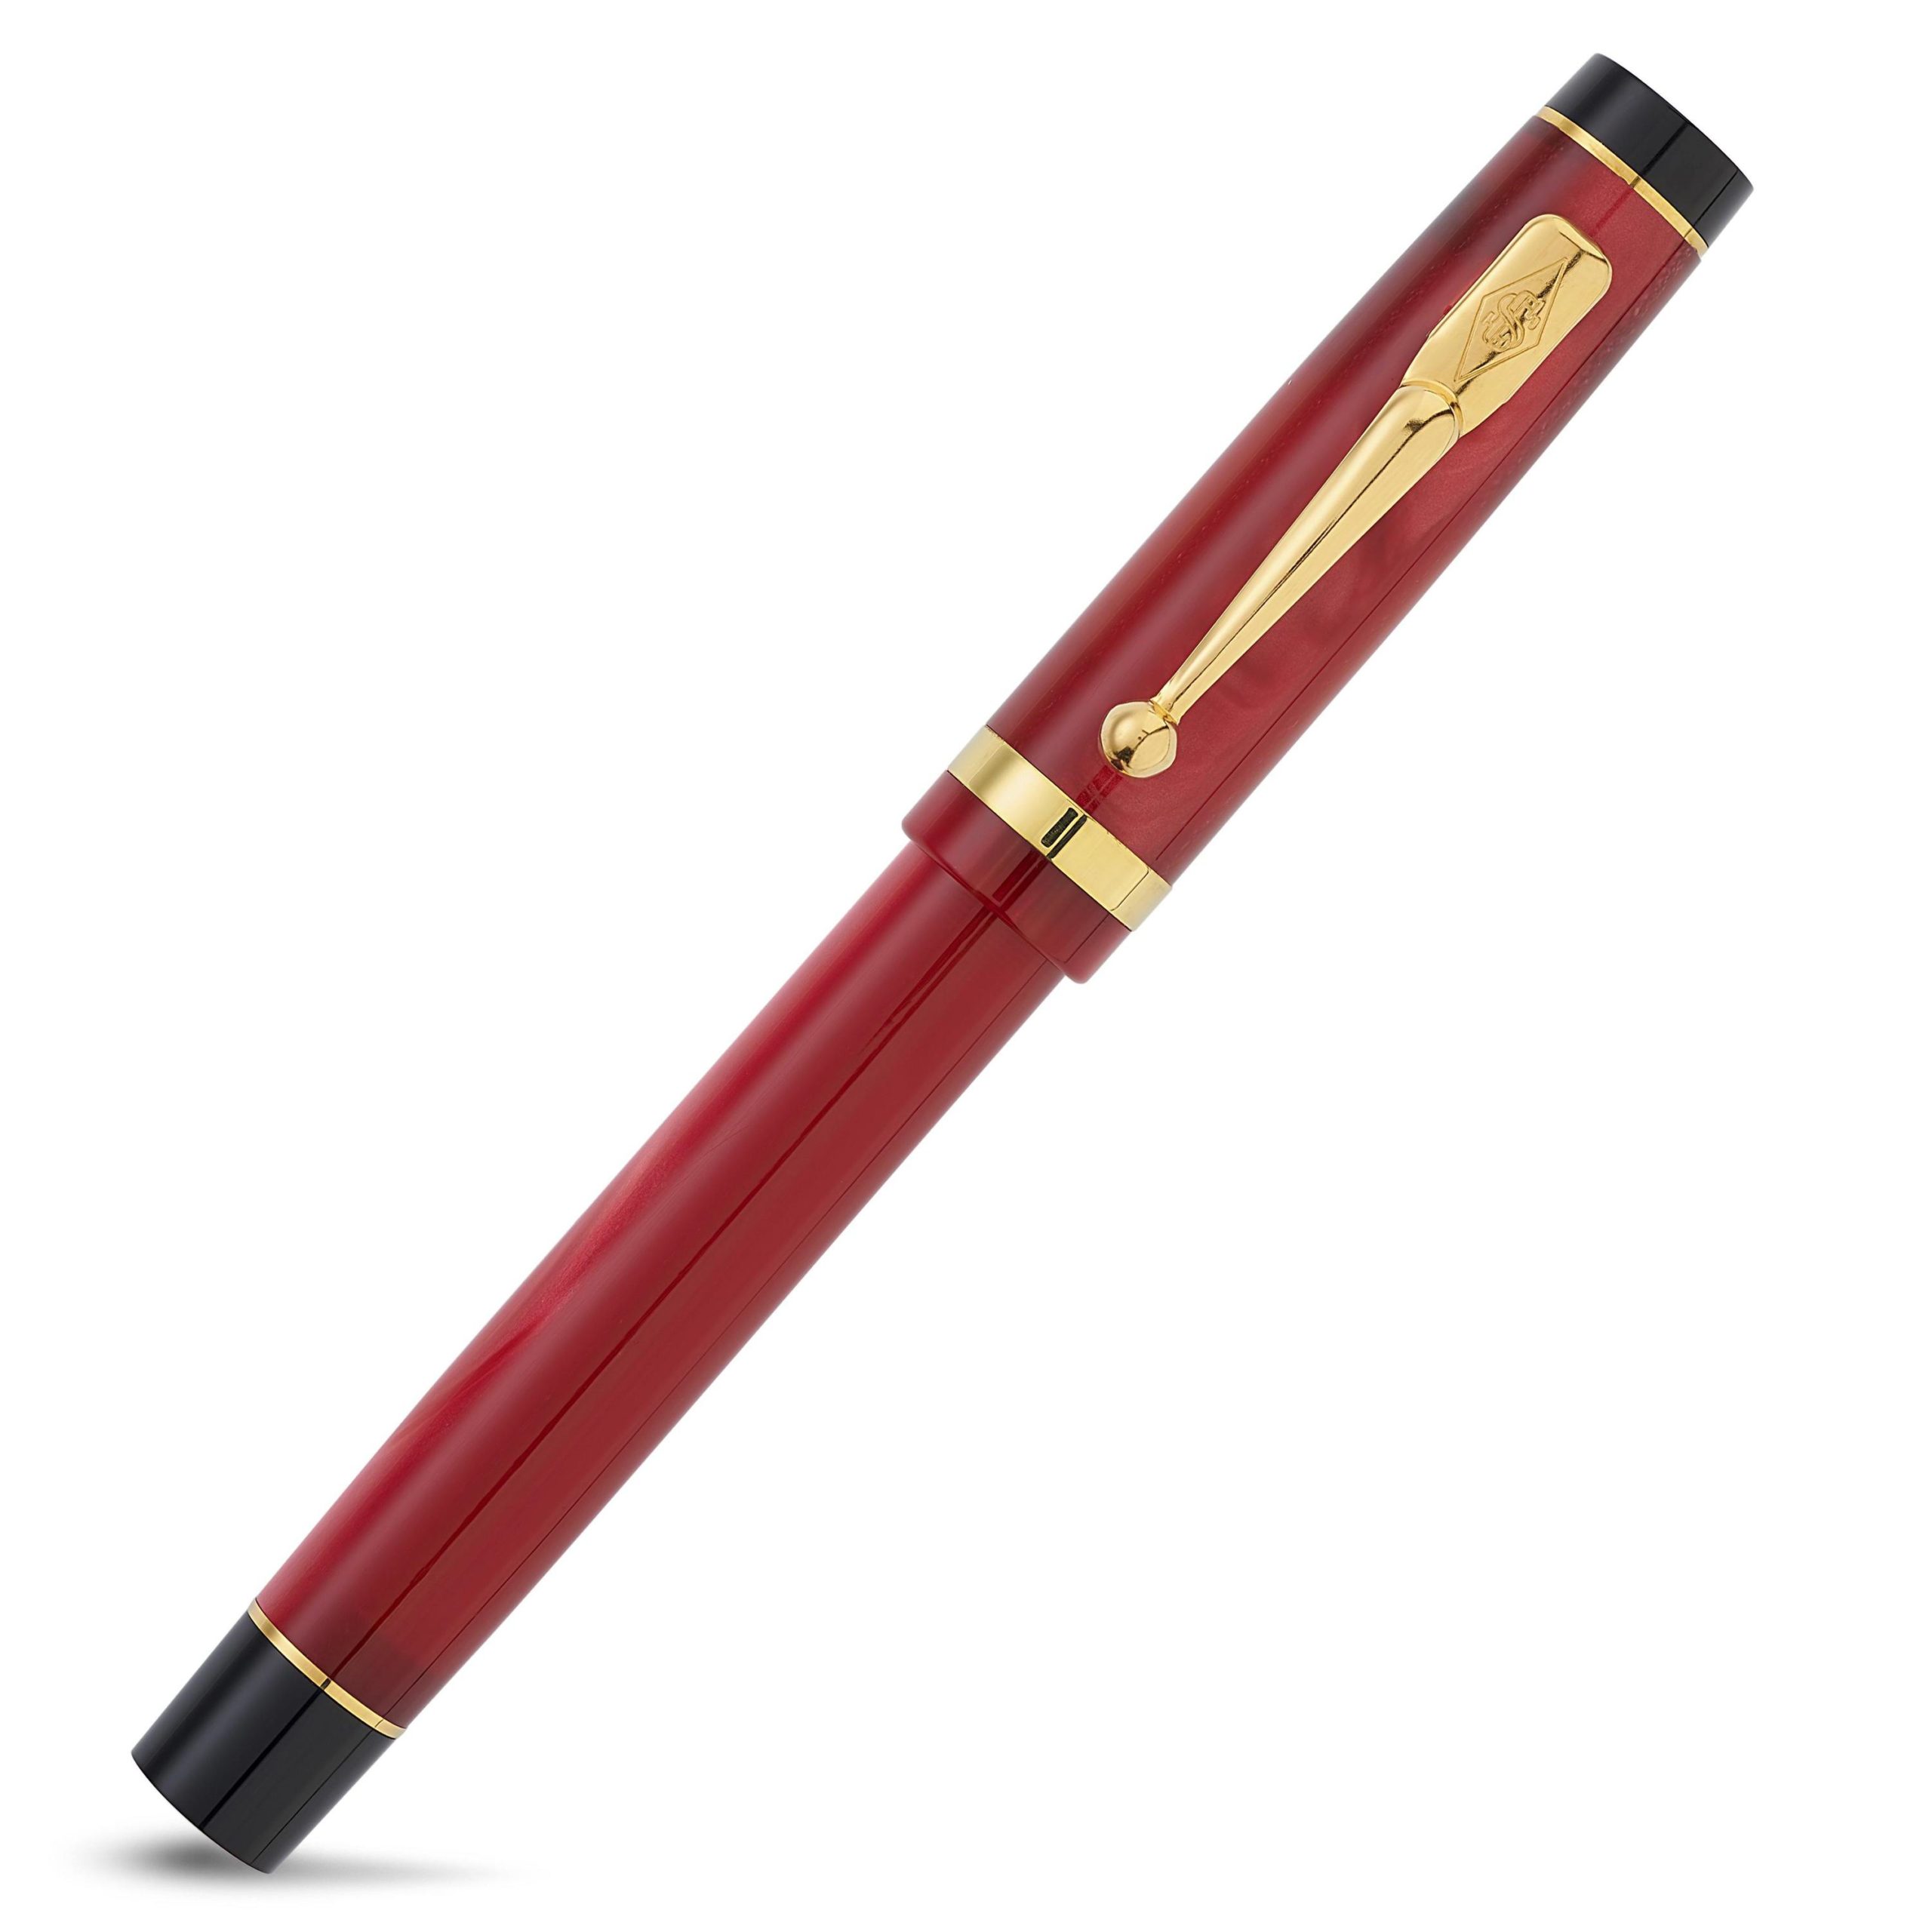 Conway Stewart Fountain Pen Duro Red Closed